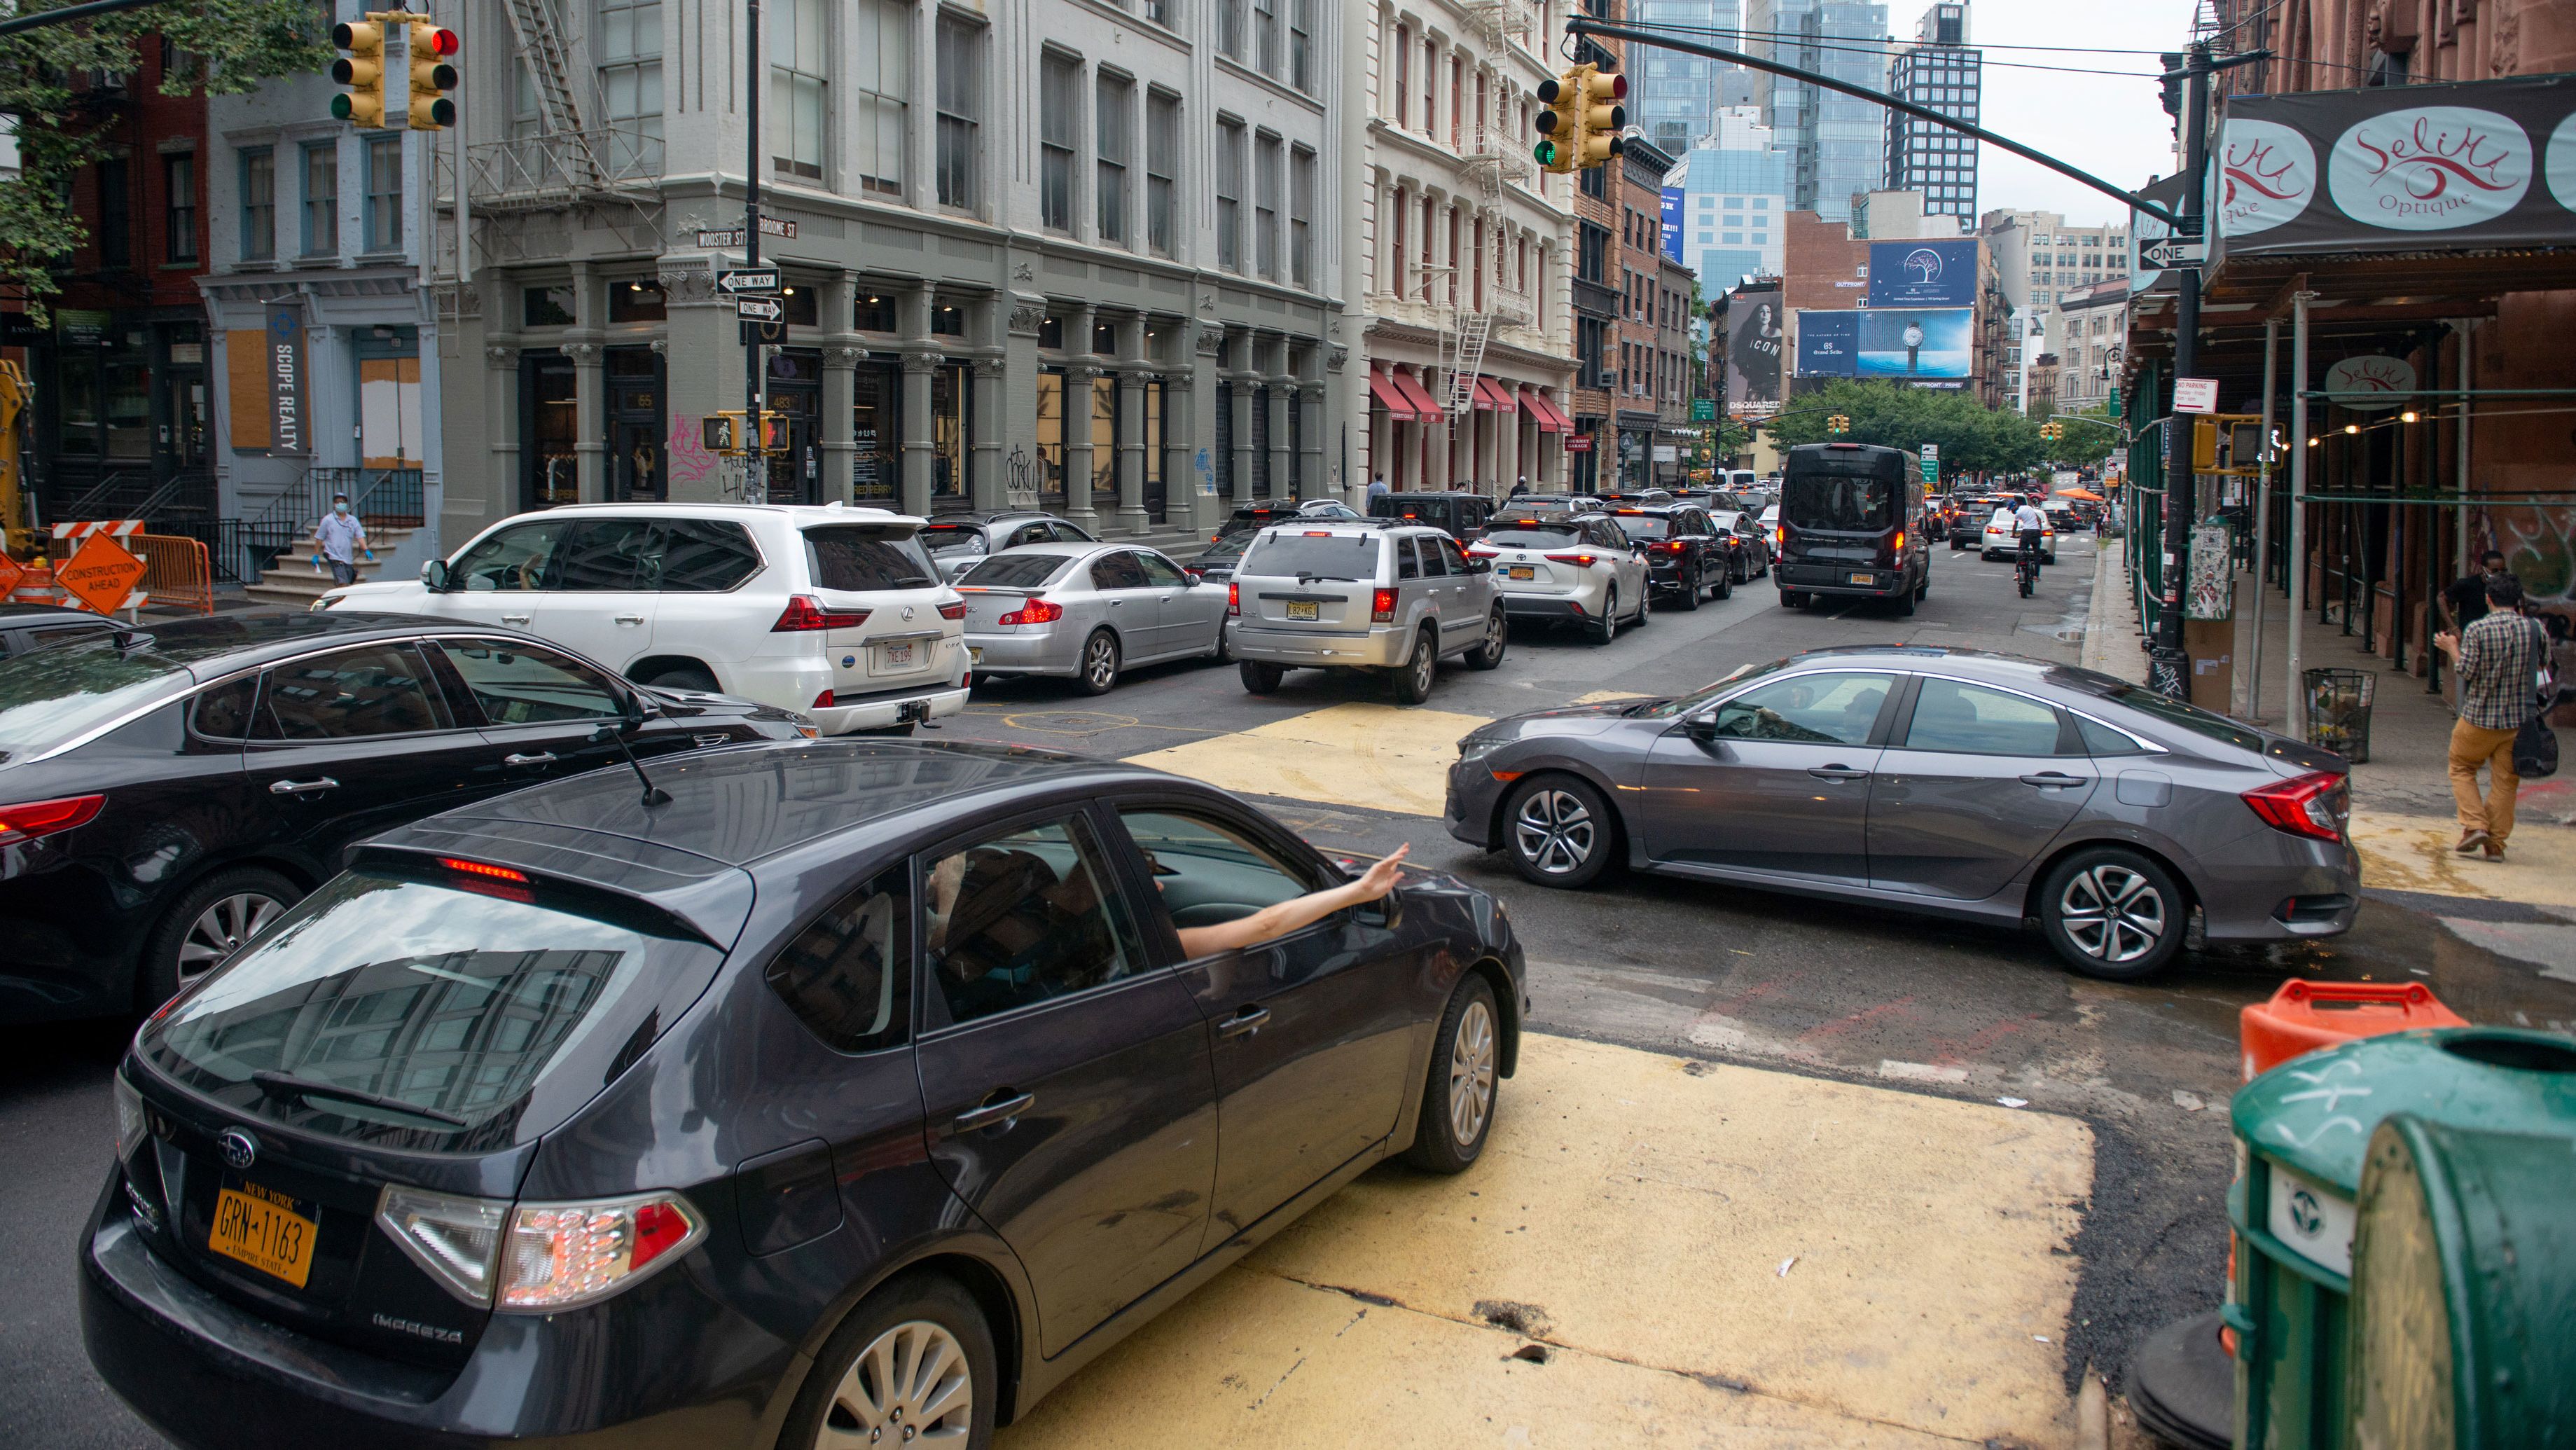 Cars crowd an intersection in the SoHo neighborhood of New York City on August 7, 2020.